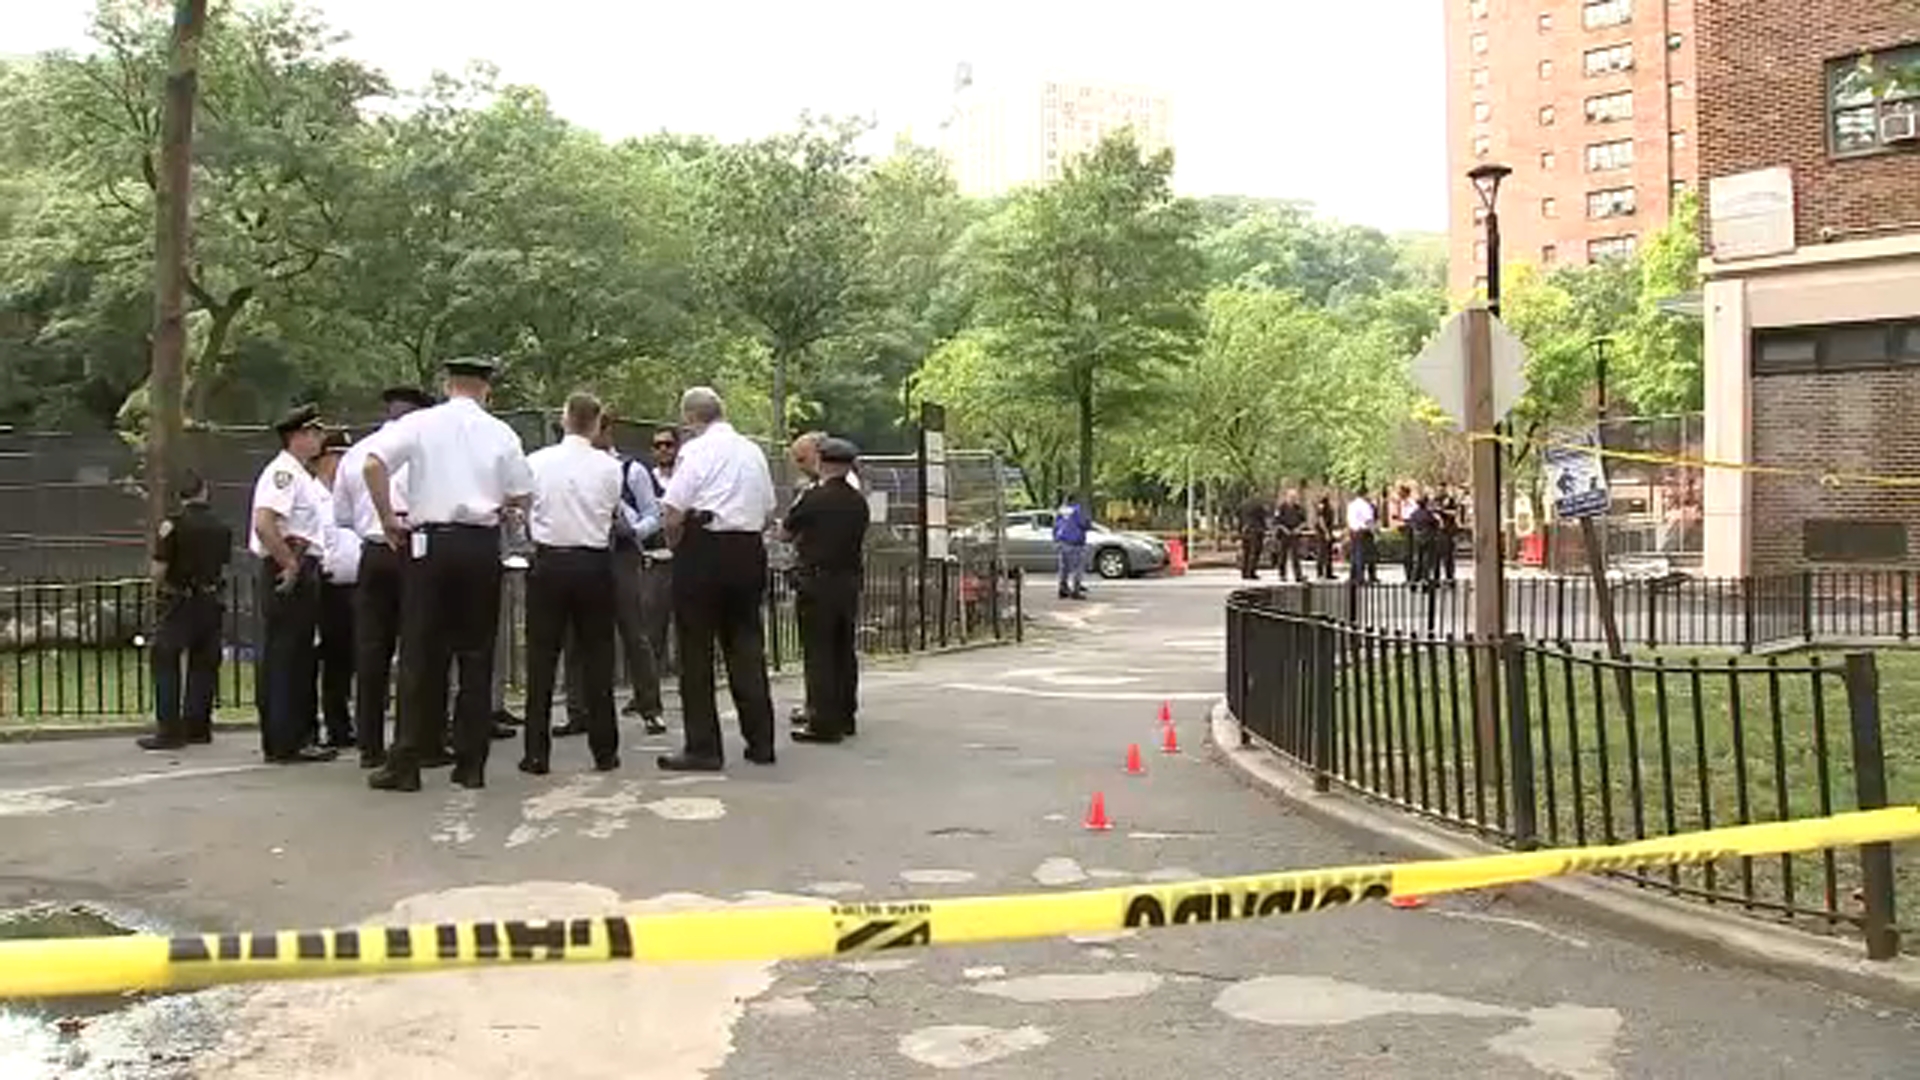 17-year-old killed after being shot inside NYCHA building in Harlem